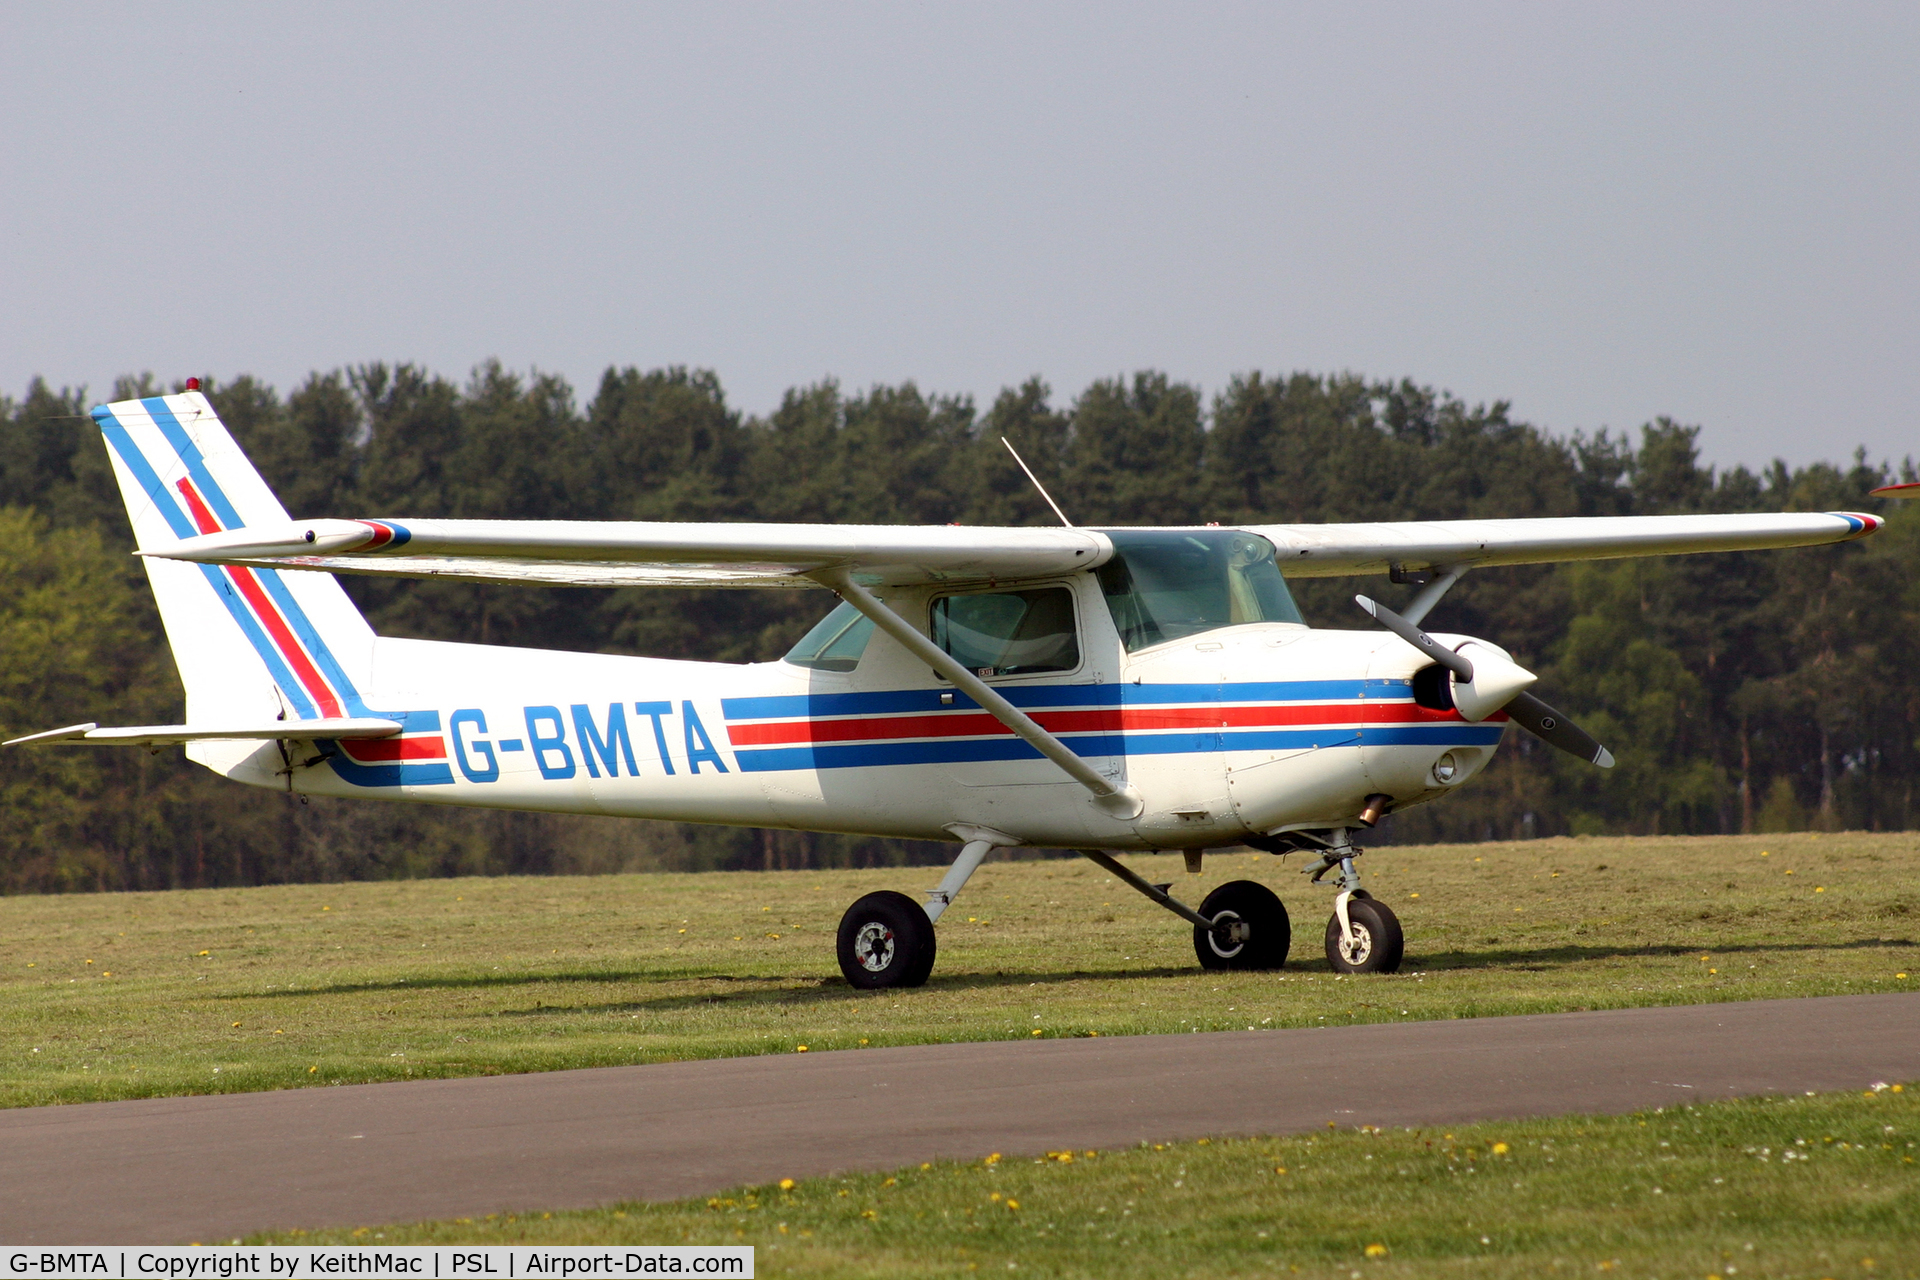 G-BMTA, 1979 Cessna 152 C/N 152-82864, Parked at Scone, 2007